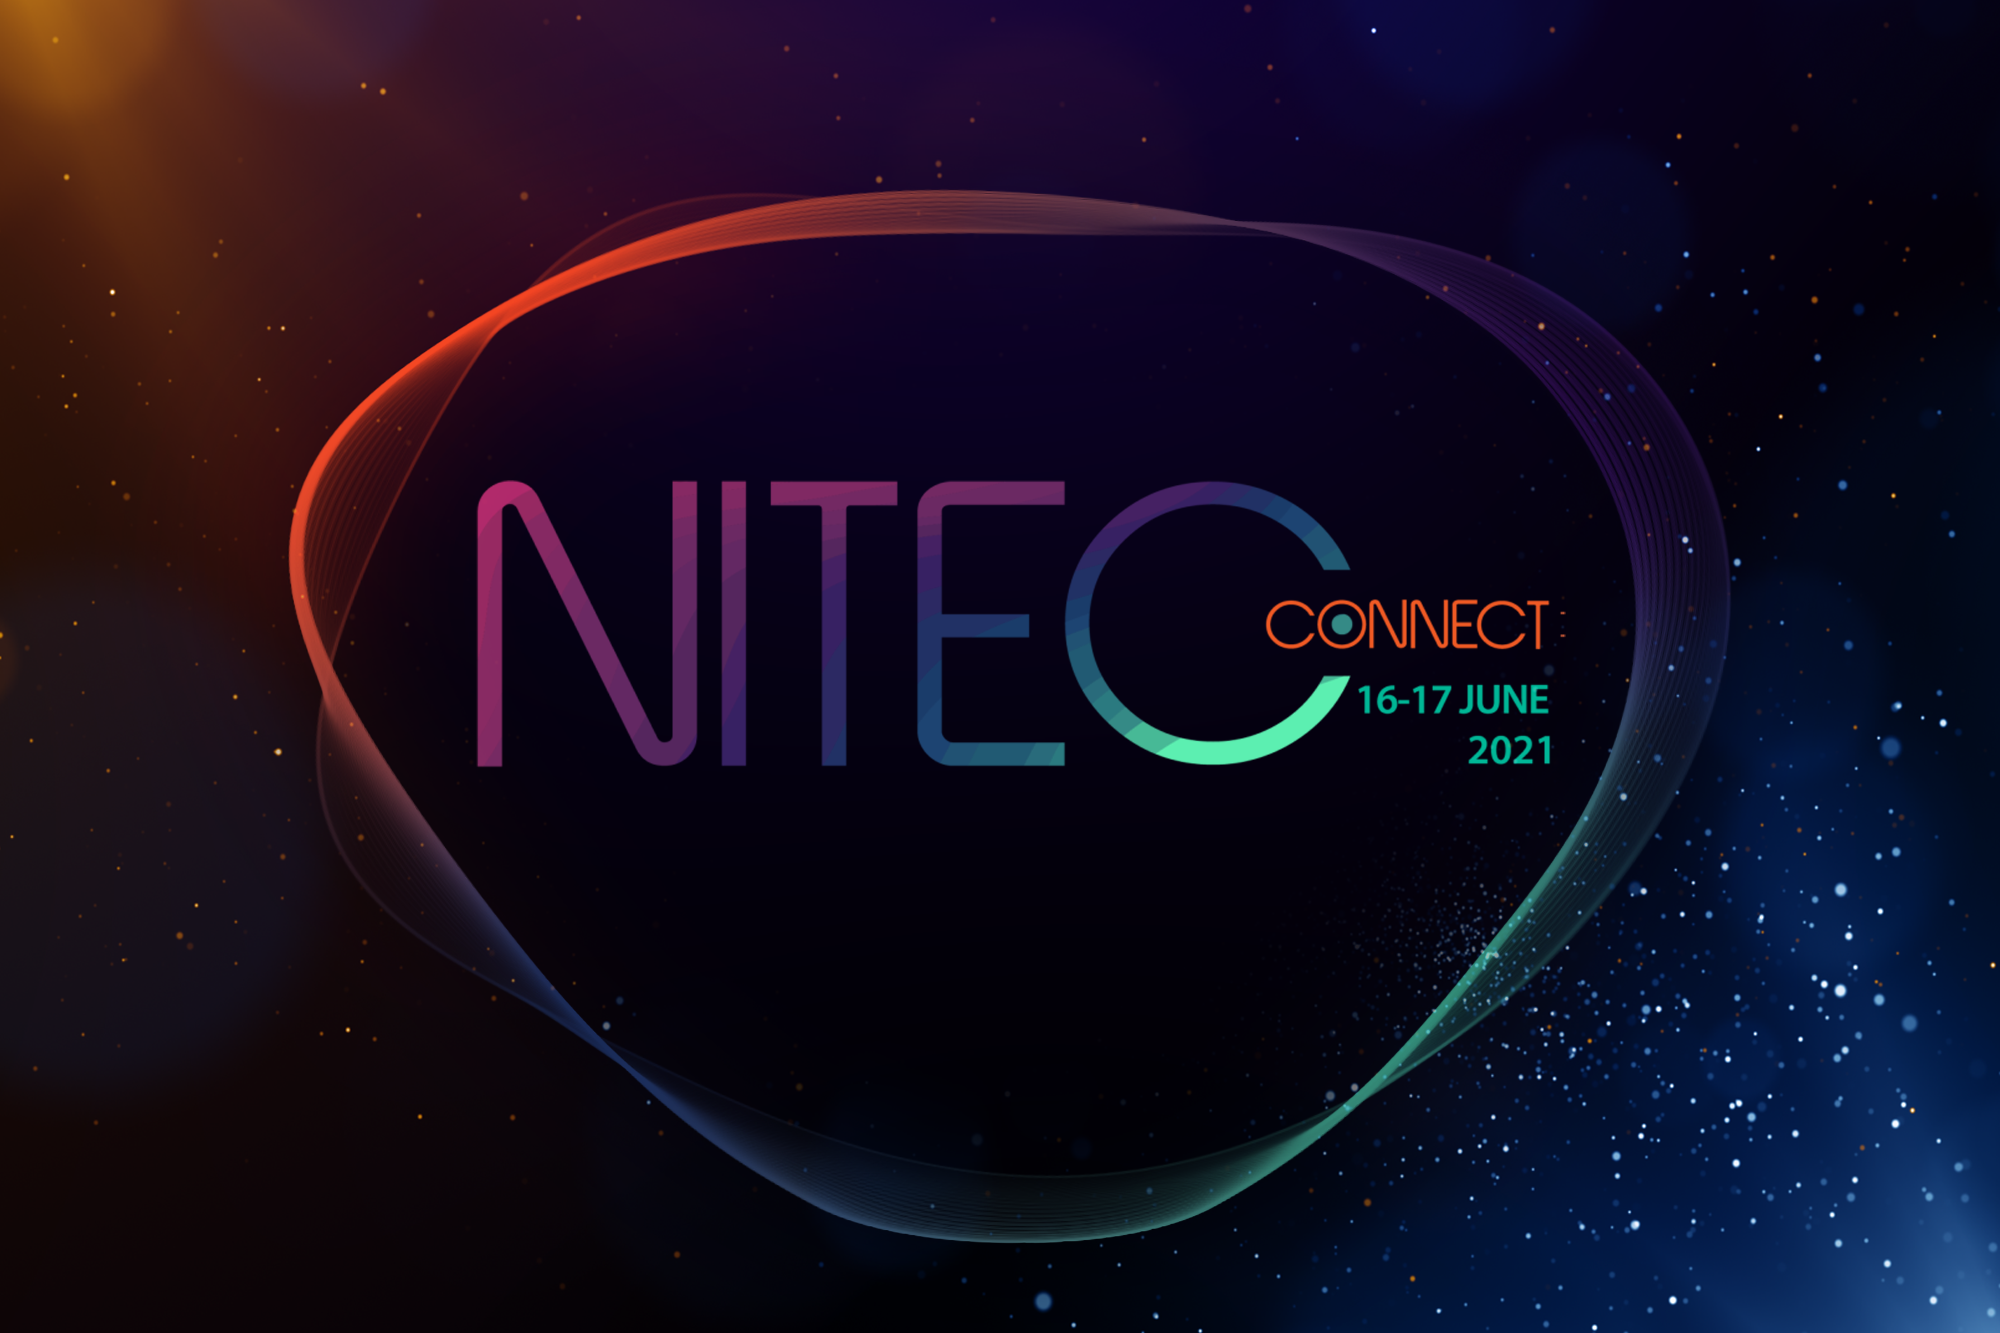 Register here: Join us at NITEC Connect on 16-17 June 2021